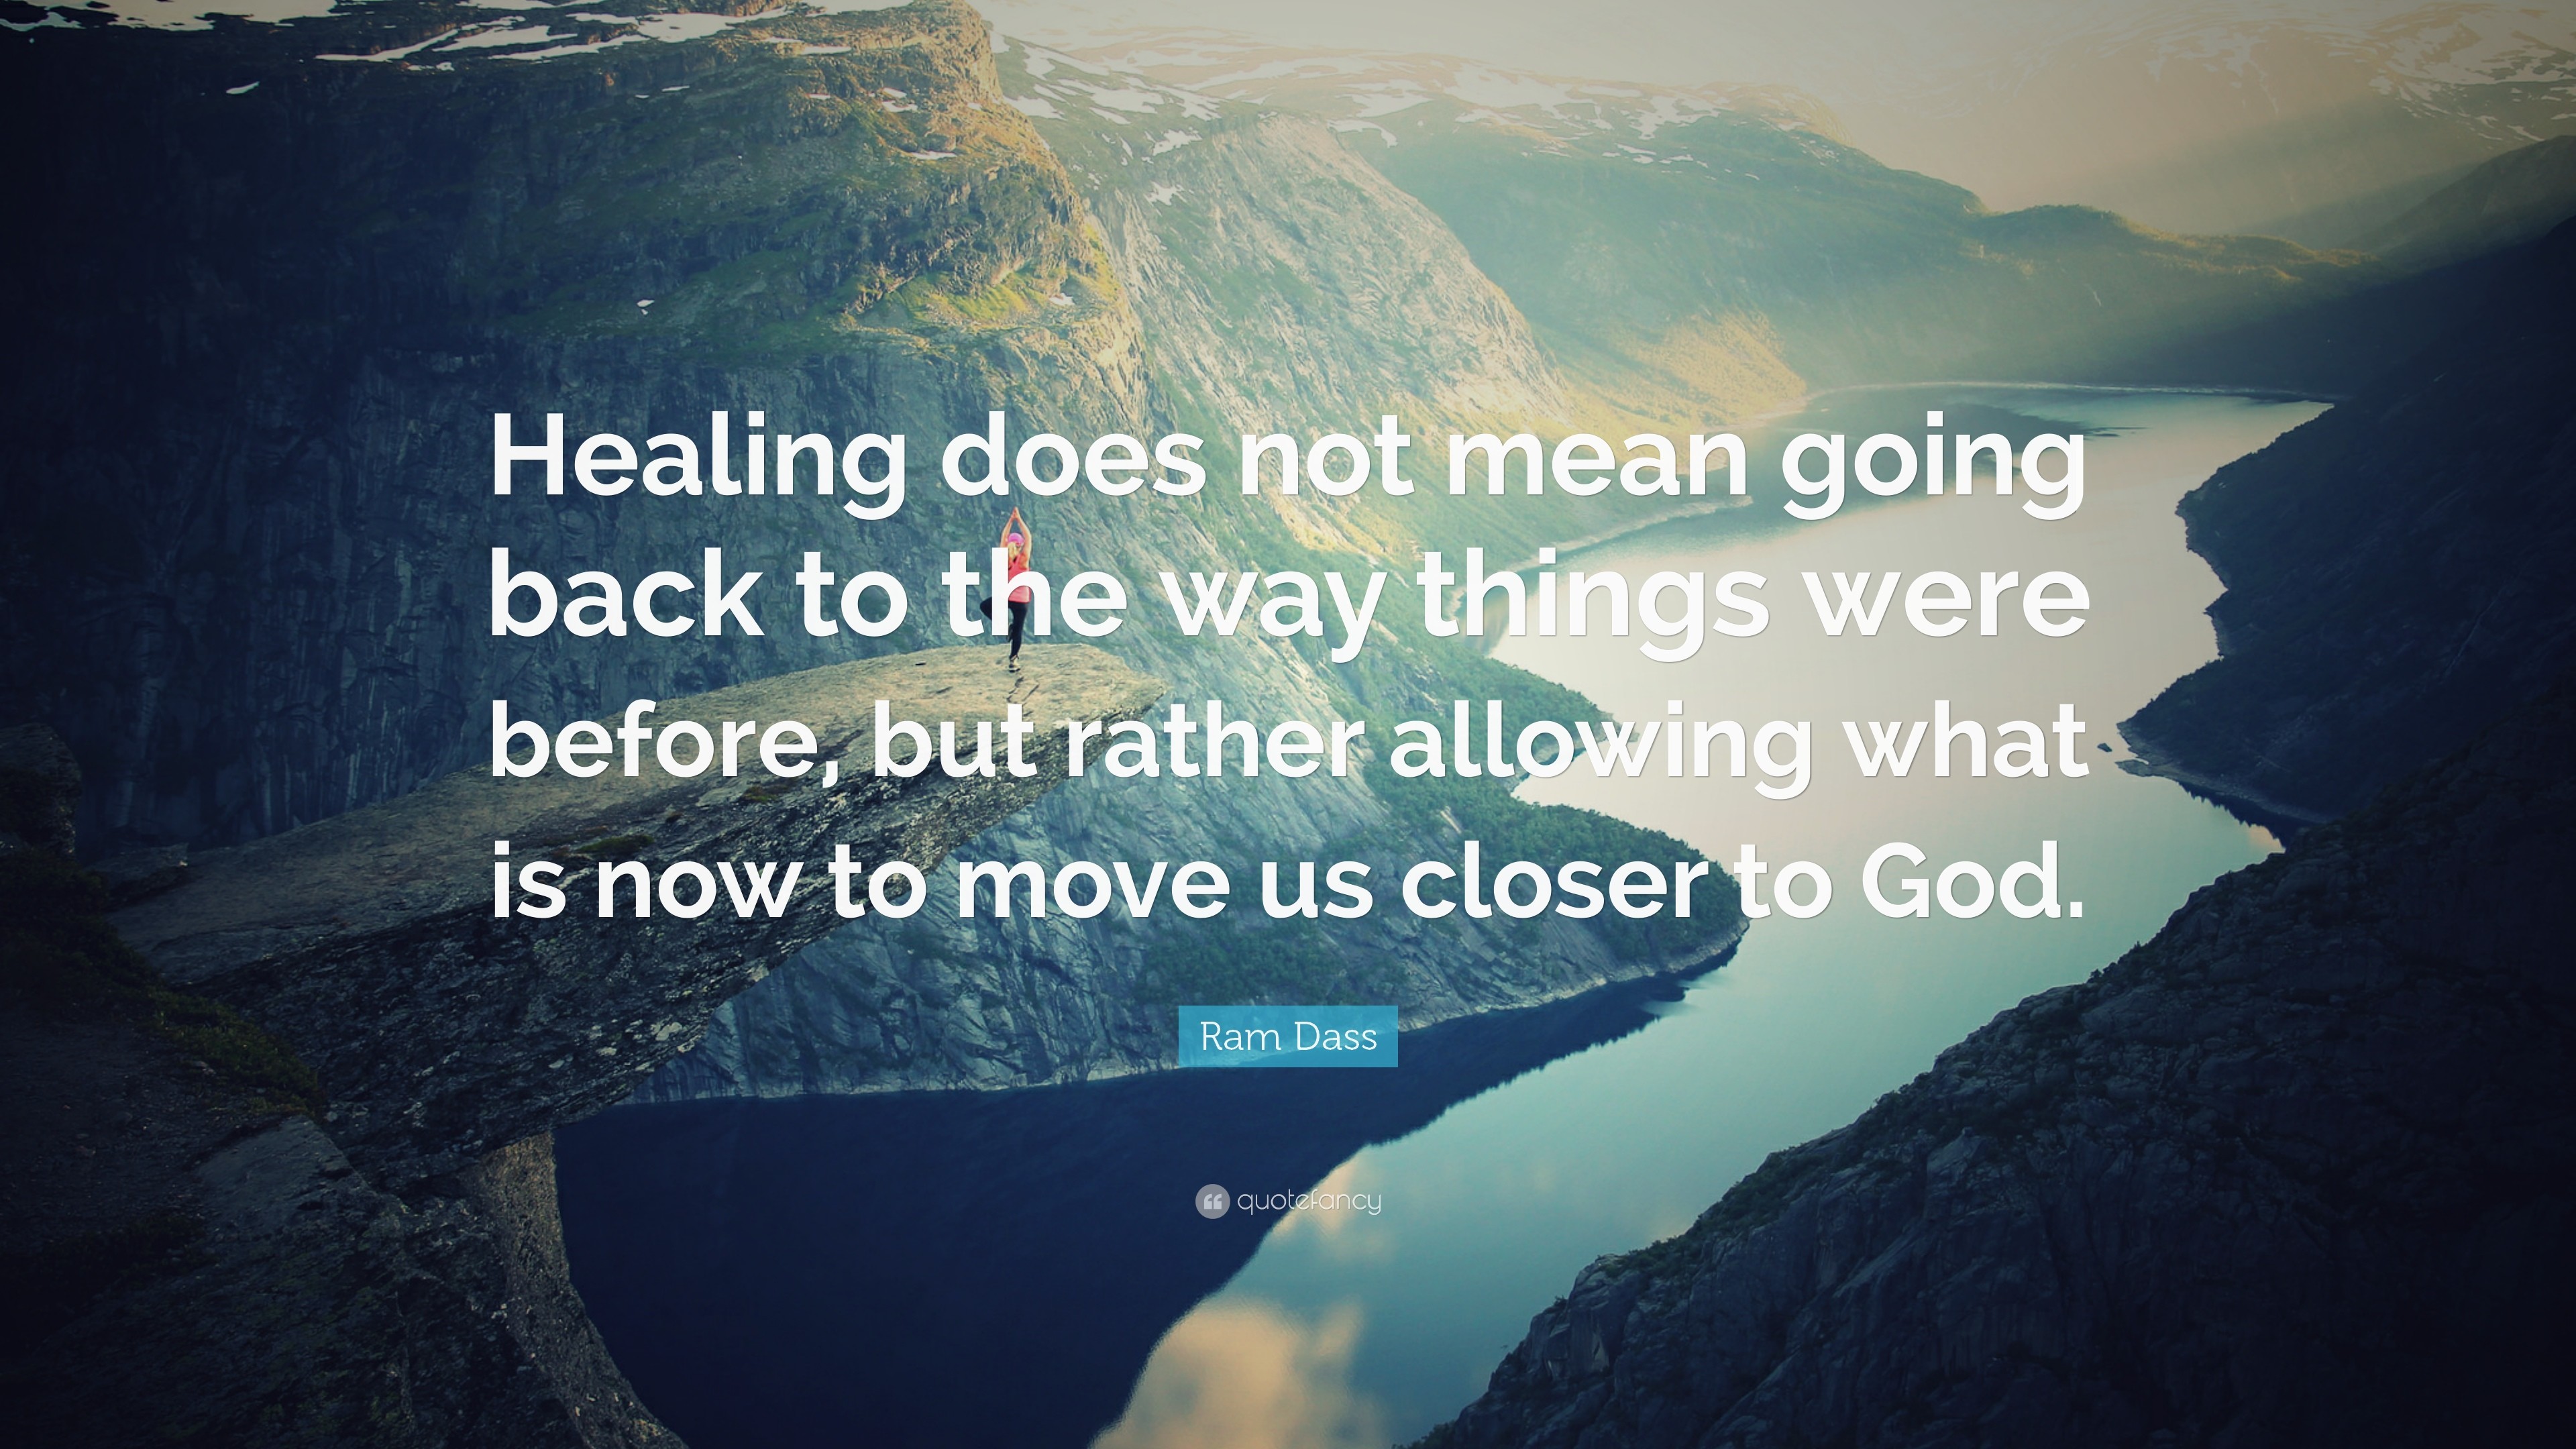 3840x2160 Ram Dass Quote: “Healing does not mean going back to the way things were